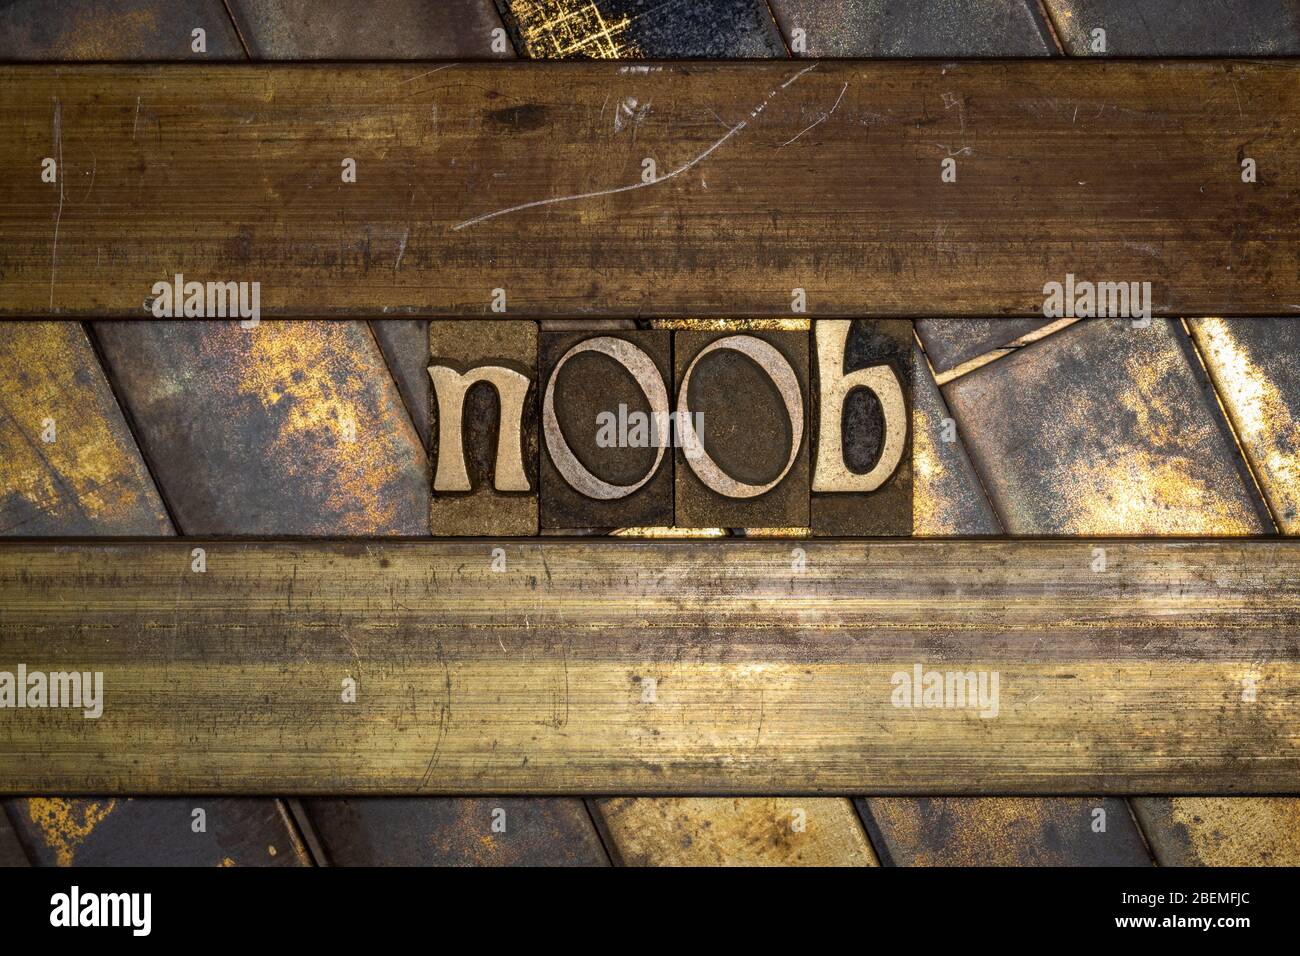 Photo of real authentic typeset letters forming noob text on vintage textured grunge copper and gold background Stock Photo